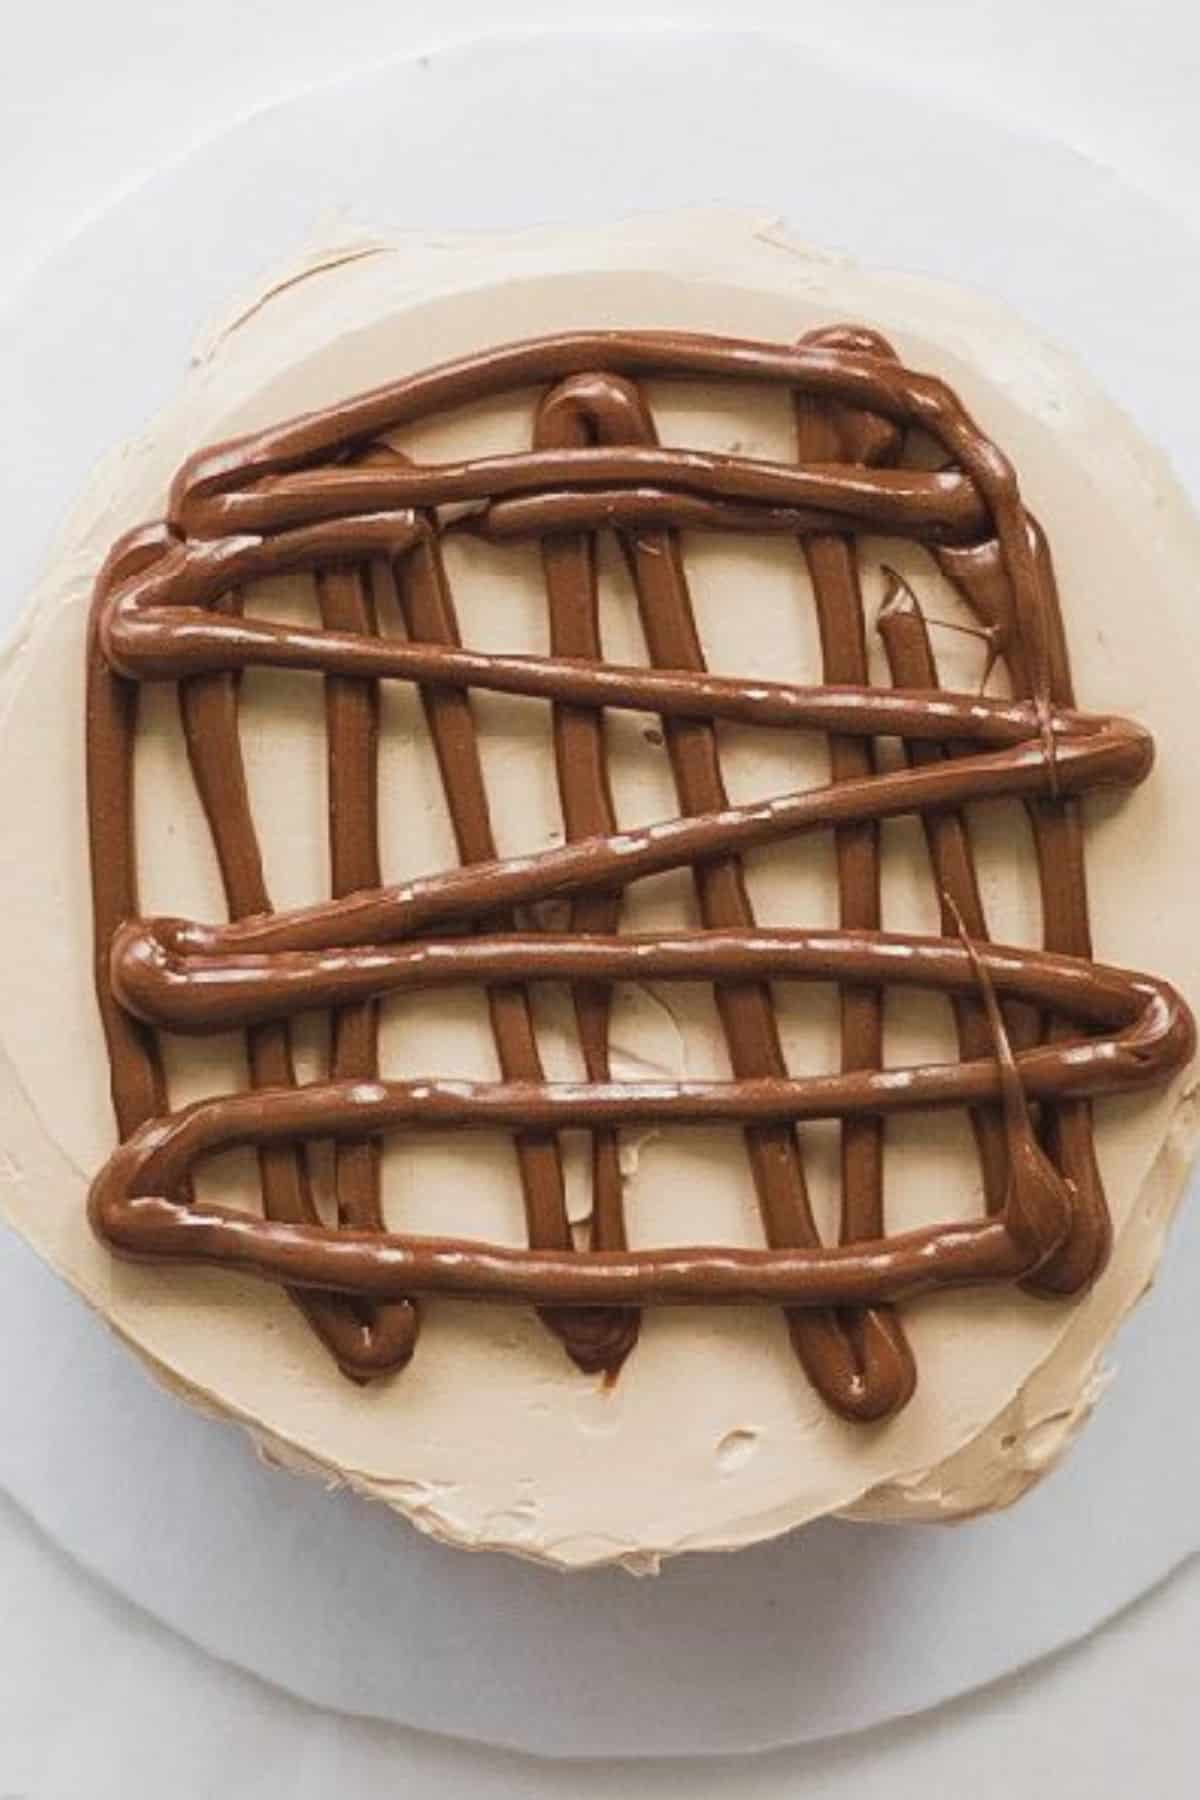 chocolate cake with nutella frosting and nutella spread on the cake